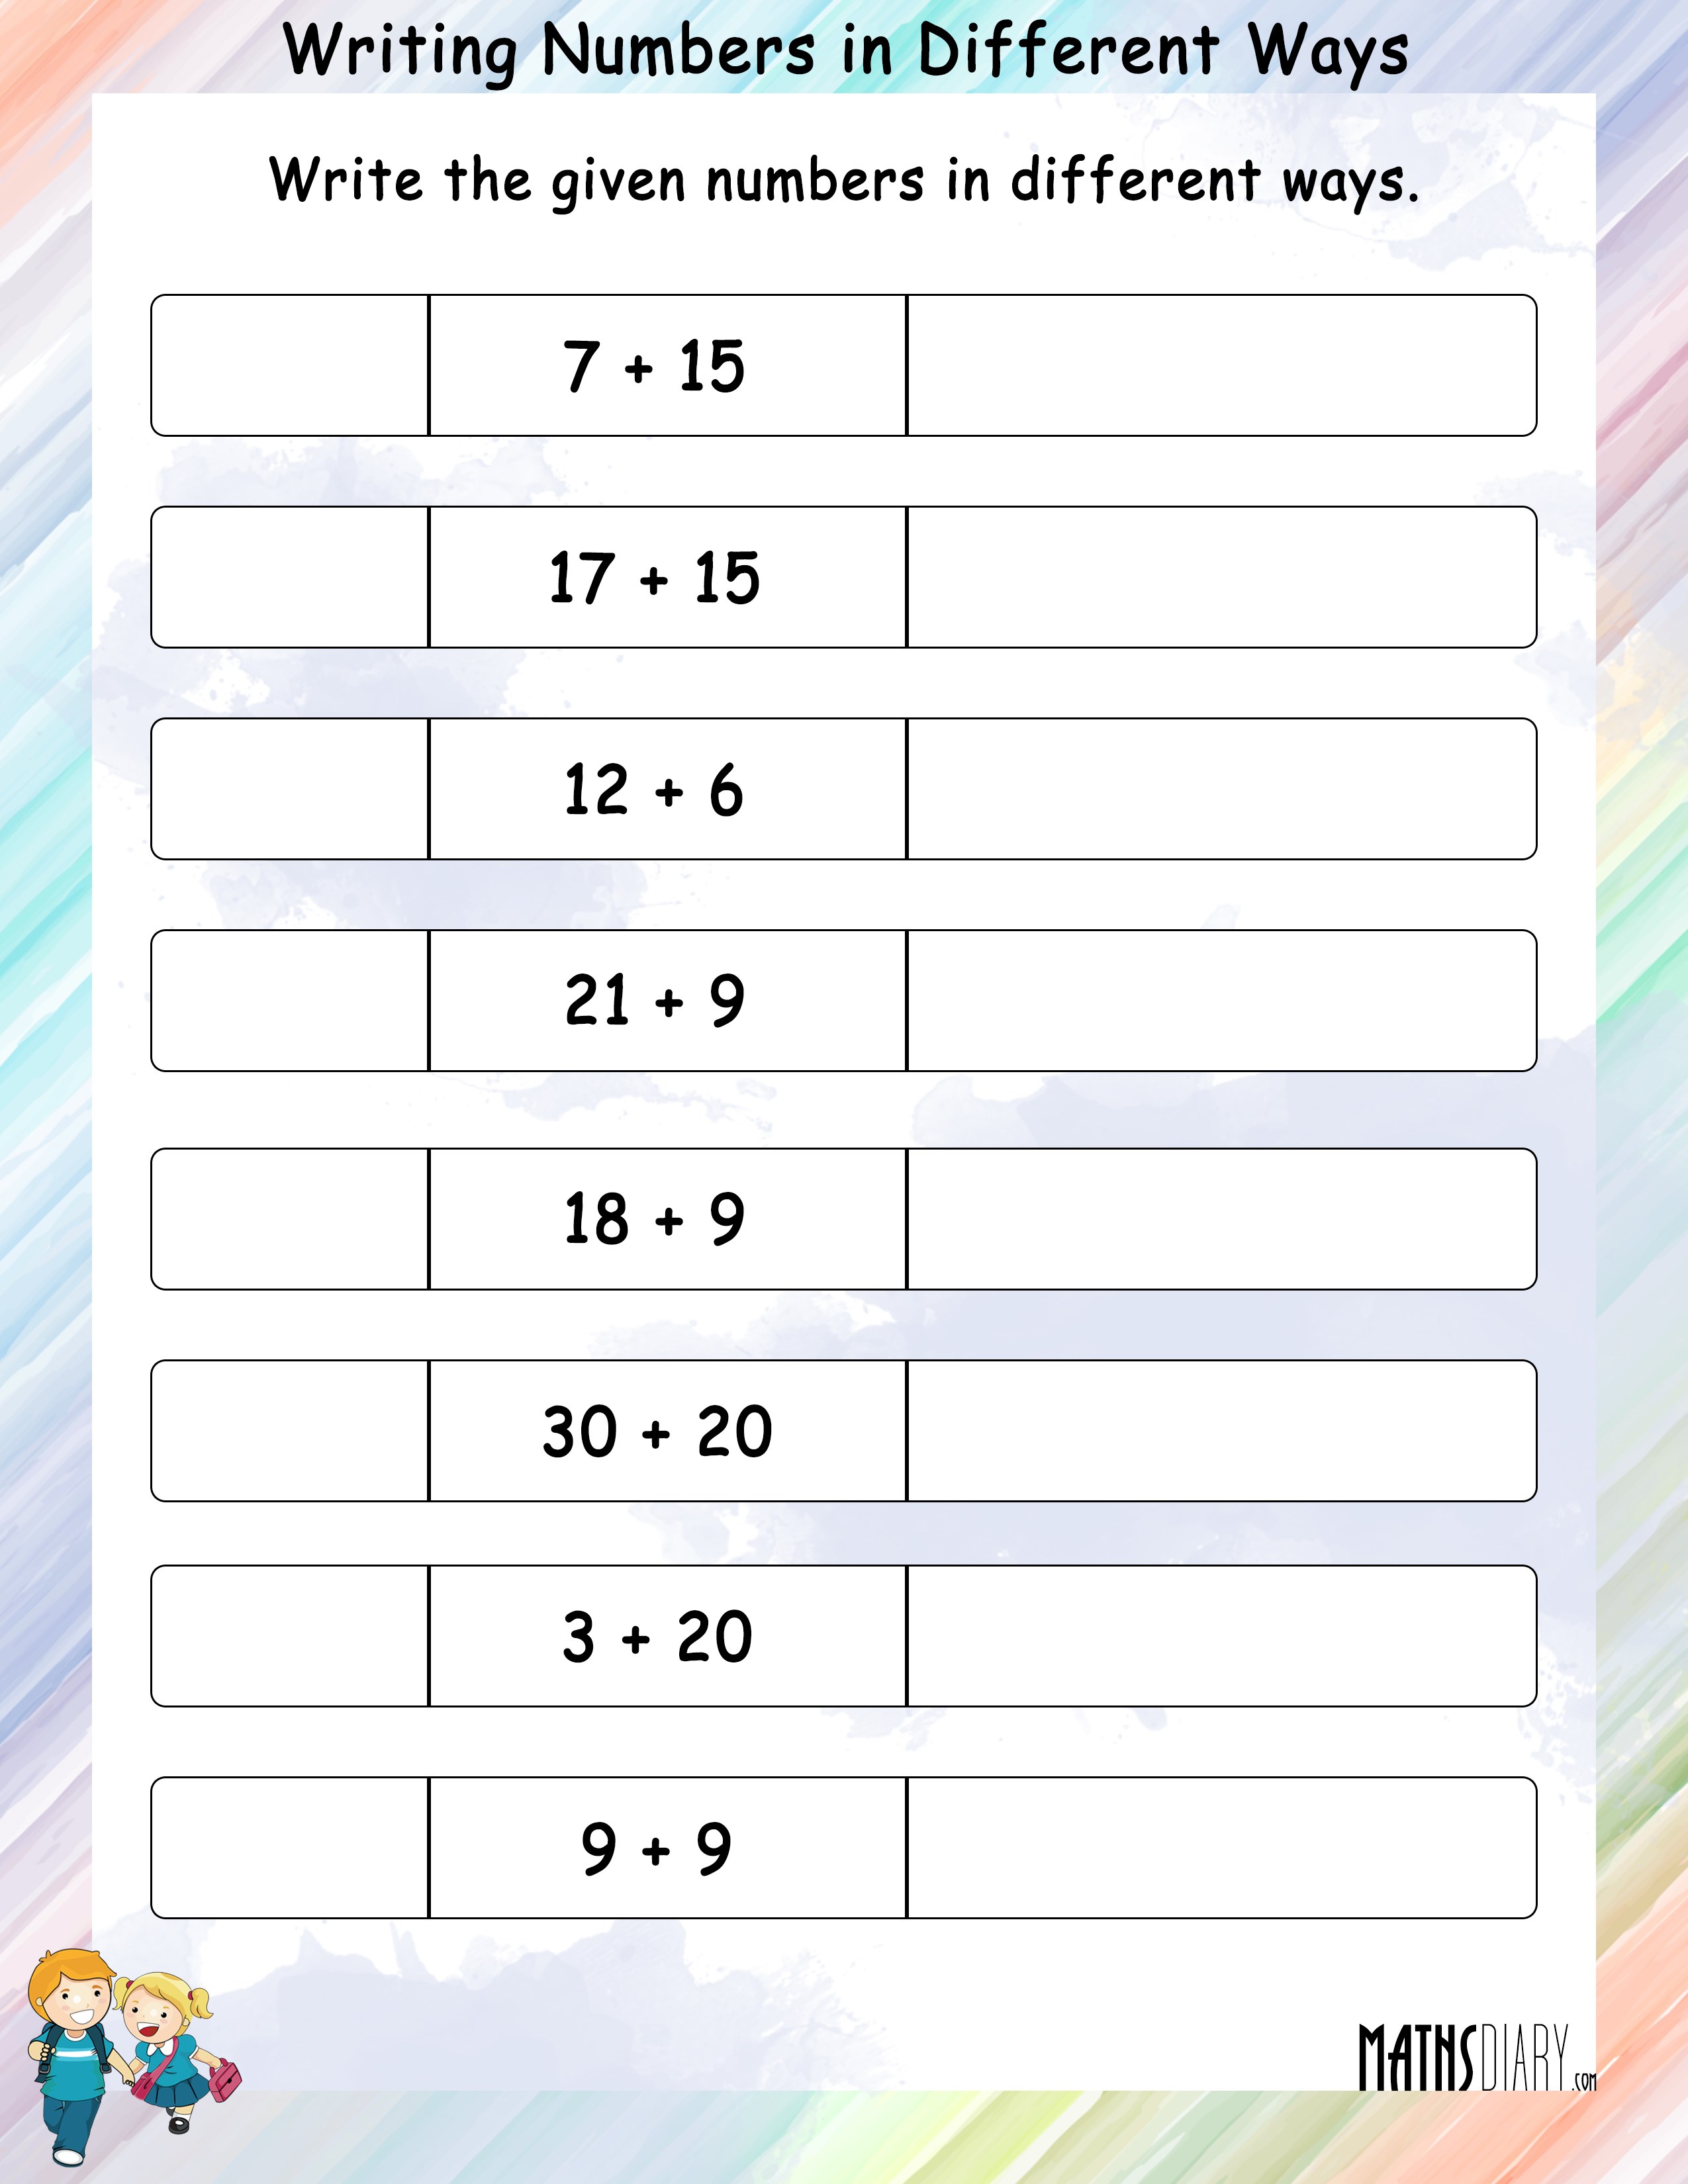 Writing numbers in different ways - Math Worksheets - MathsDiary.com